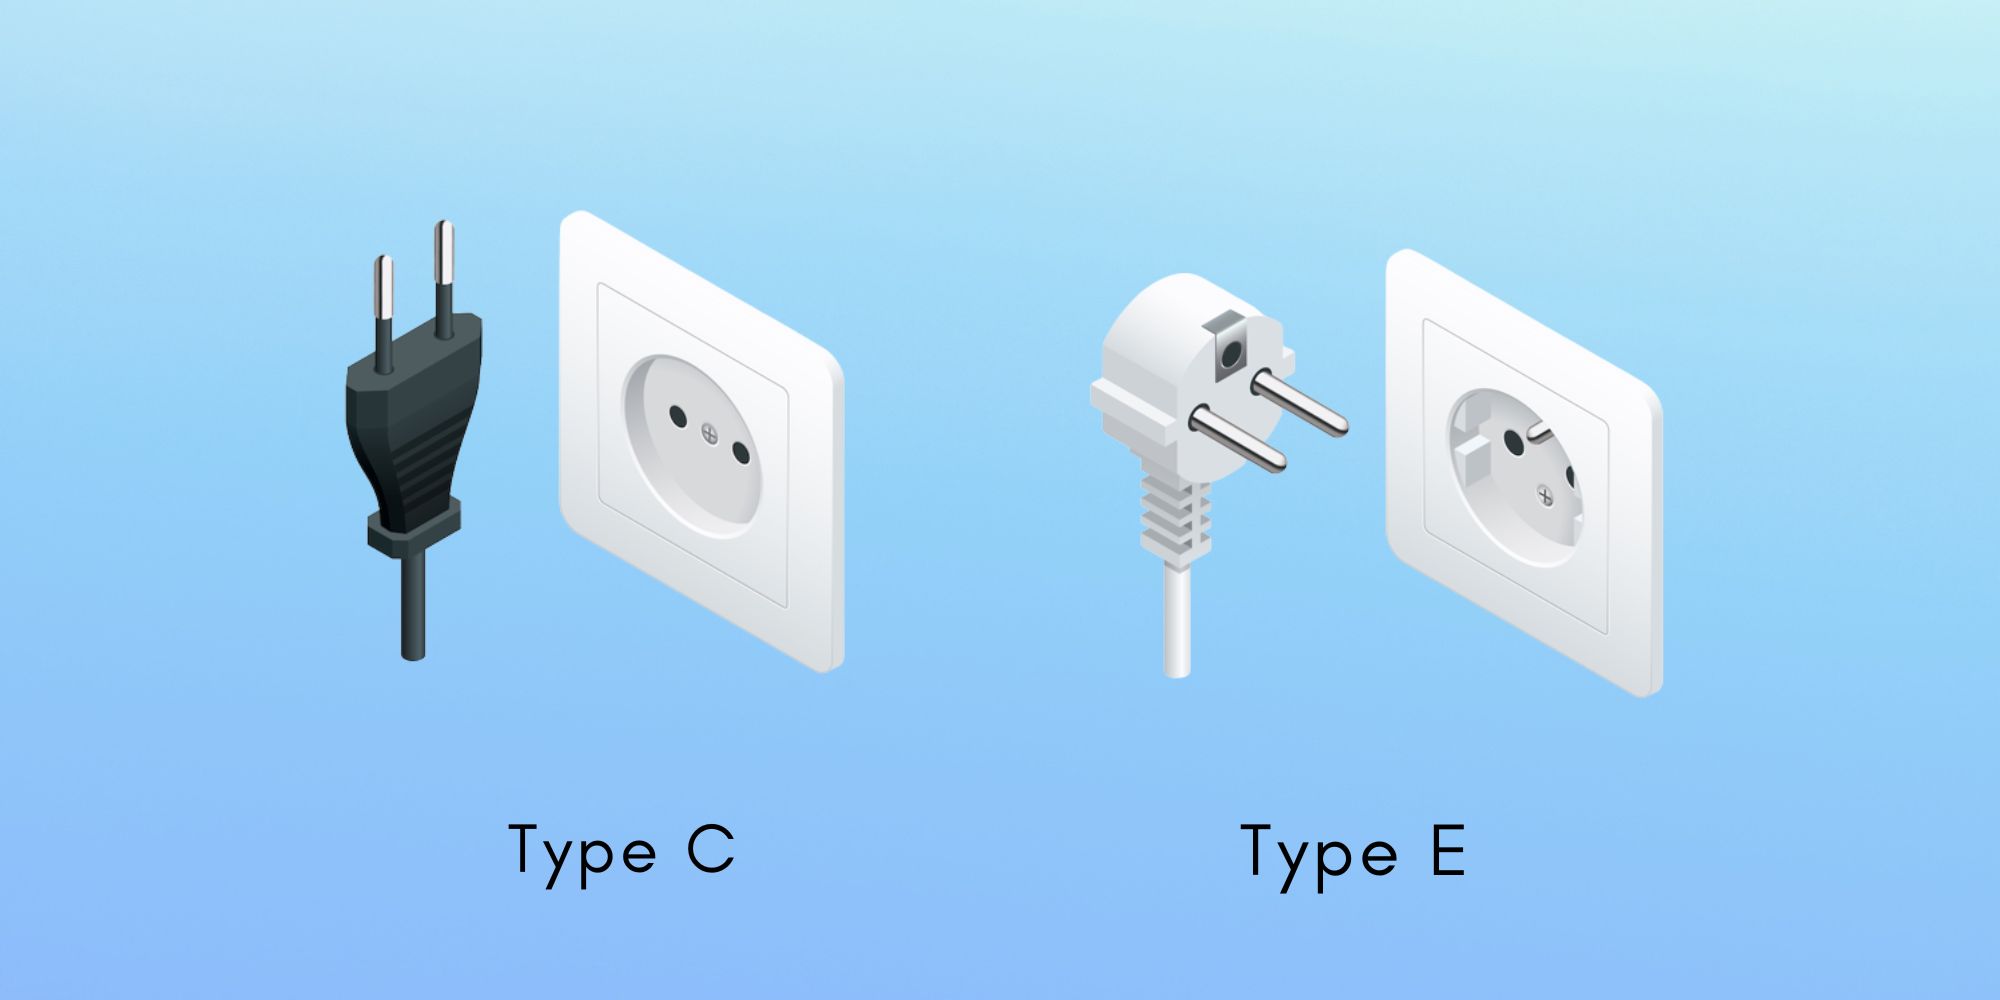 Benin Power Plugs and Sockets: Type C and Type E
